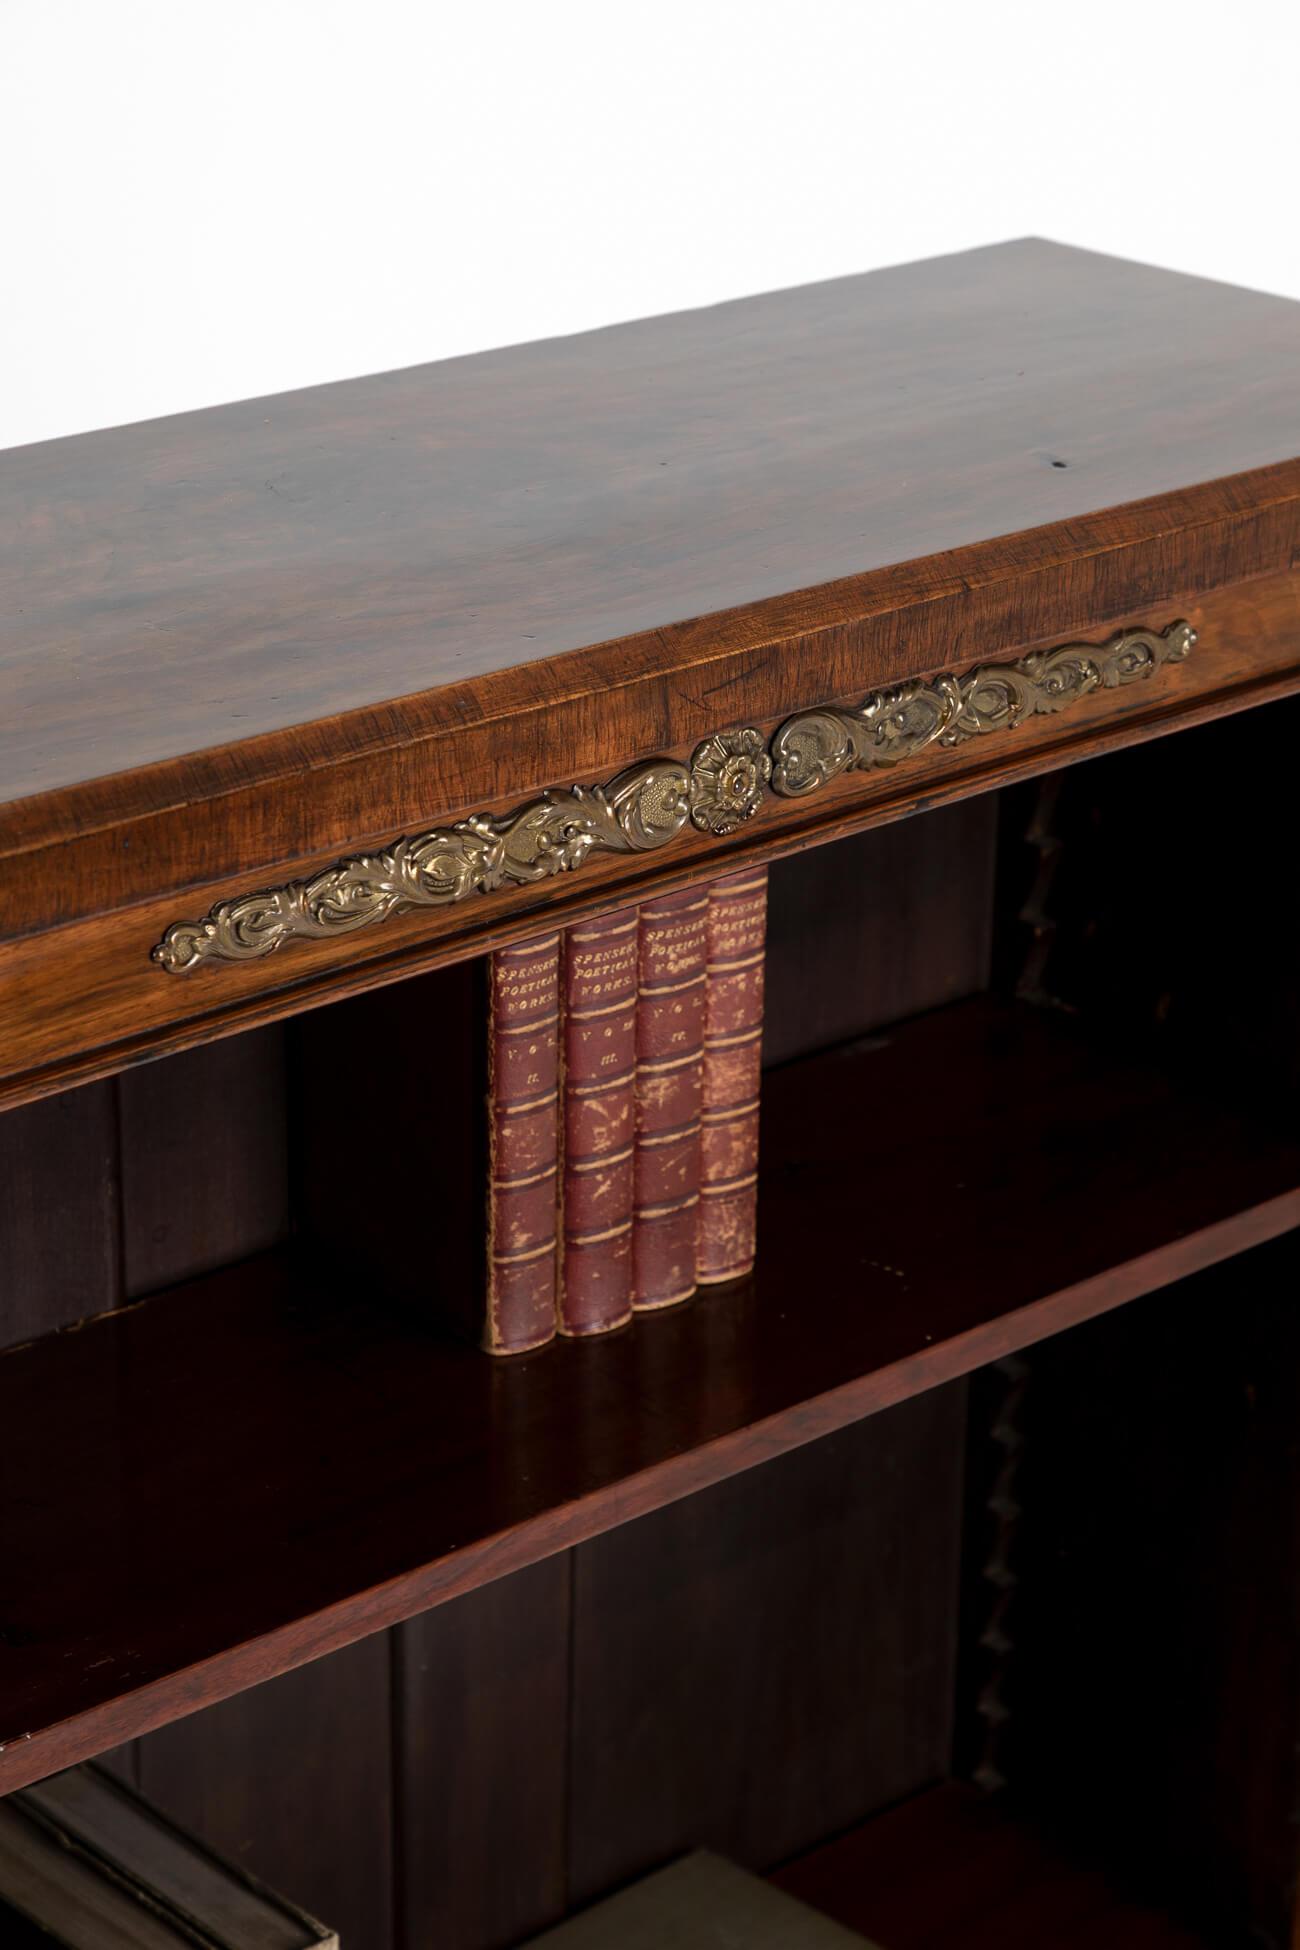 19th Century Regency Rosewood Open Bookcase on a Raised Plinth Base, circa 1815